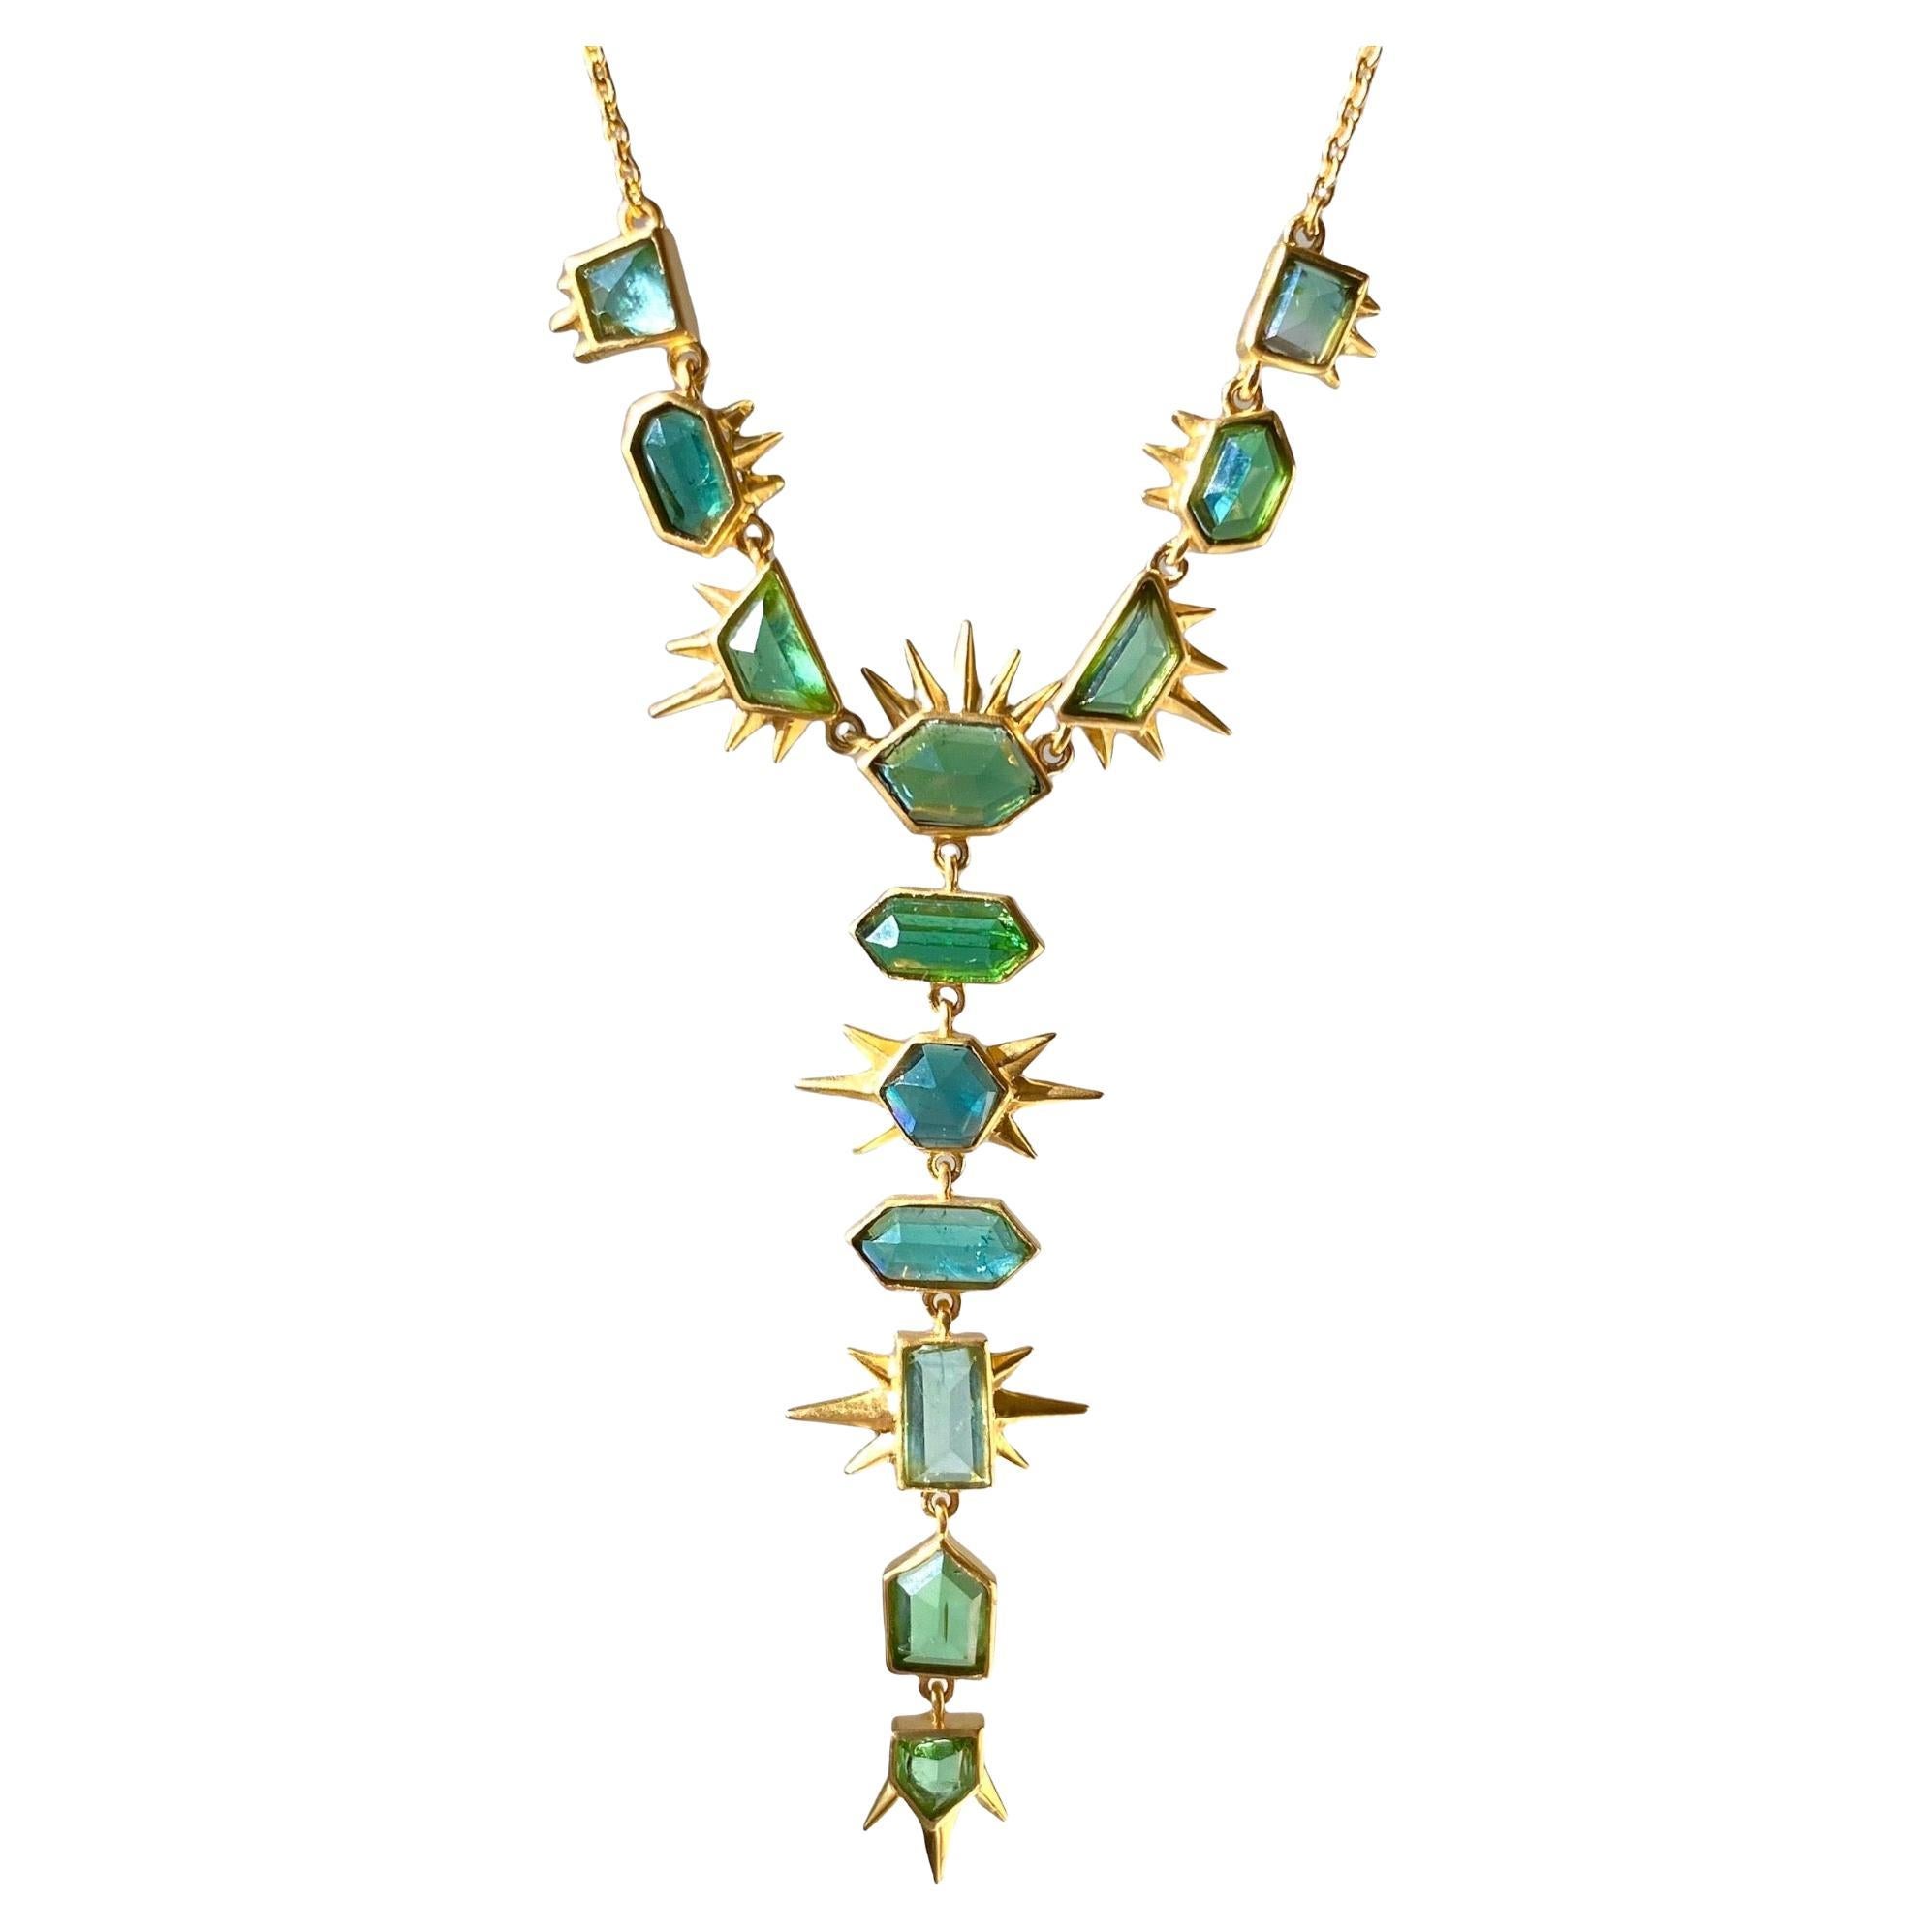 6.91 Carats Green Tourmaline and 18kt Gold Necklace by Lauren Harper